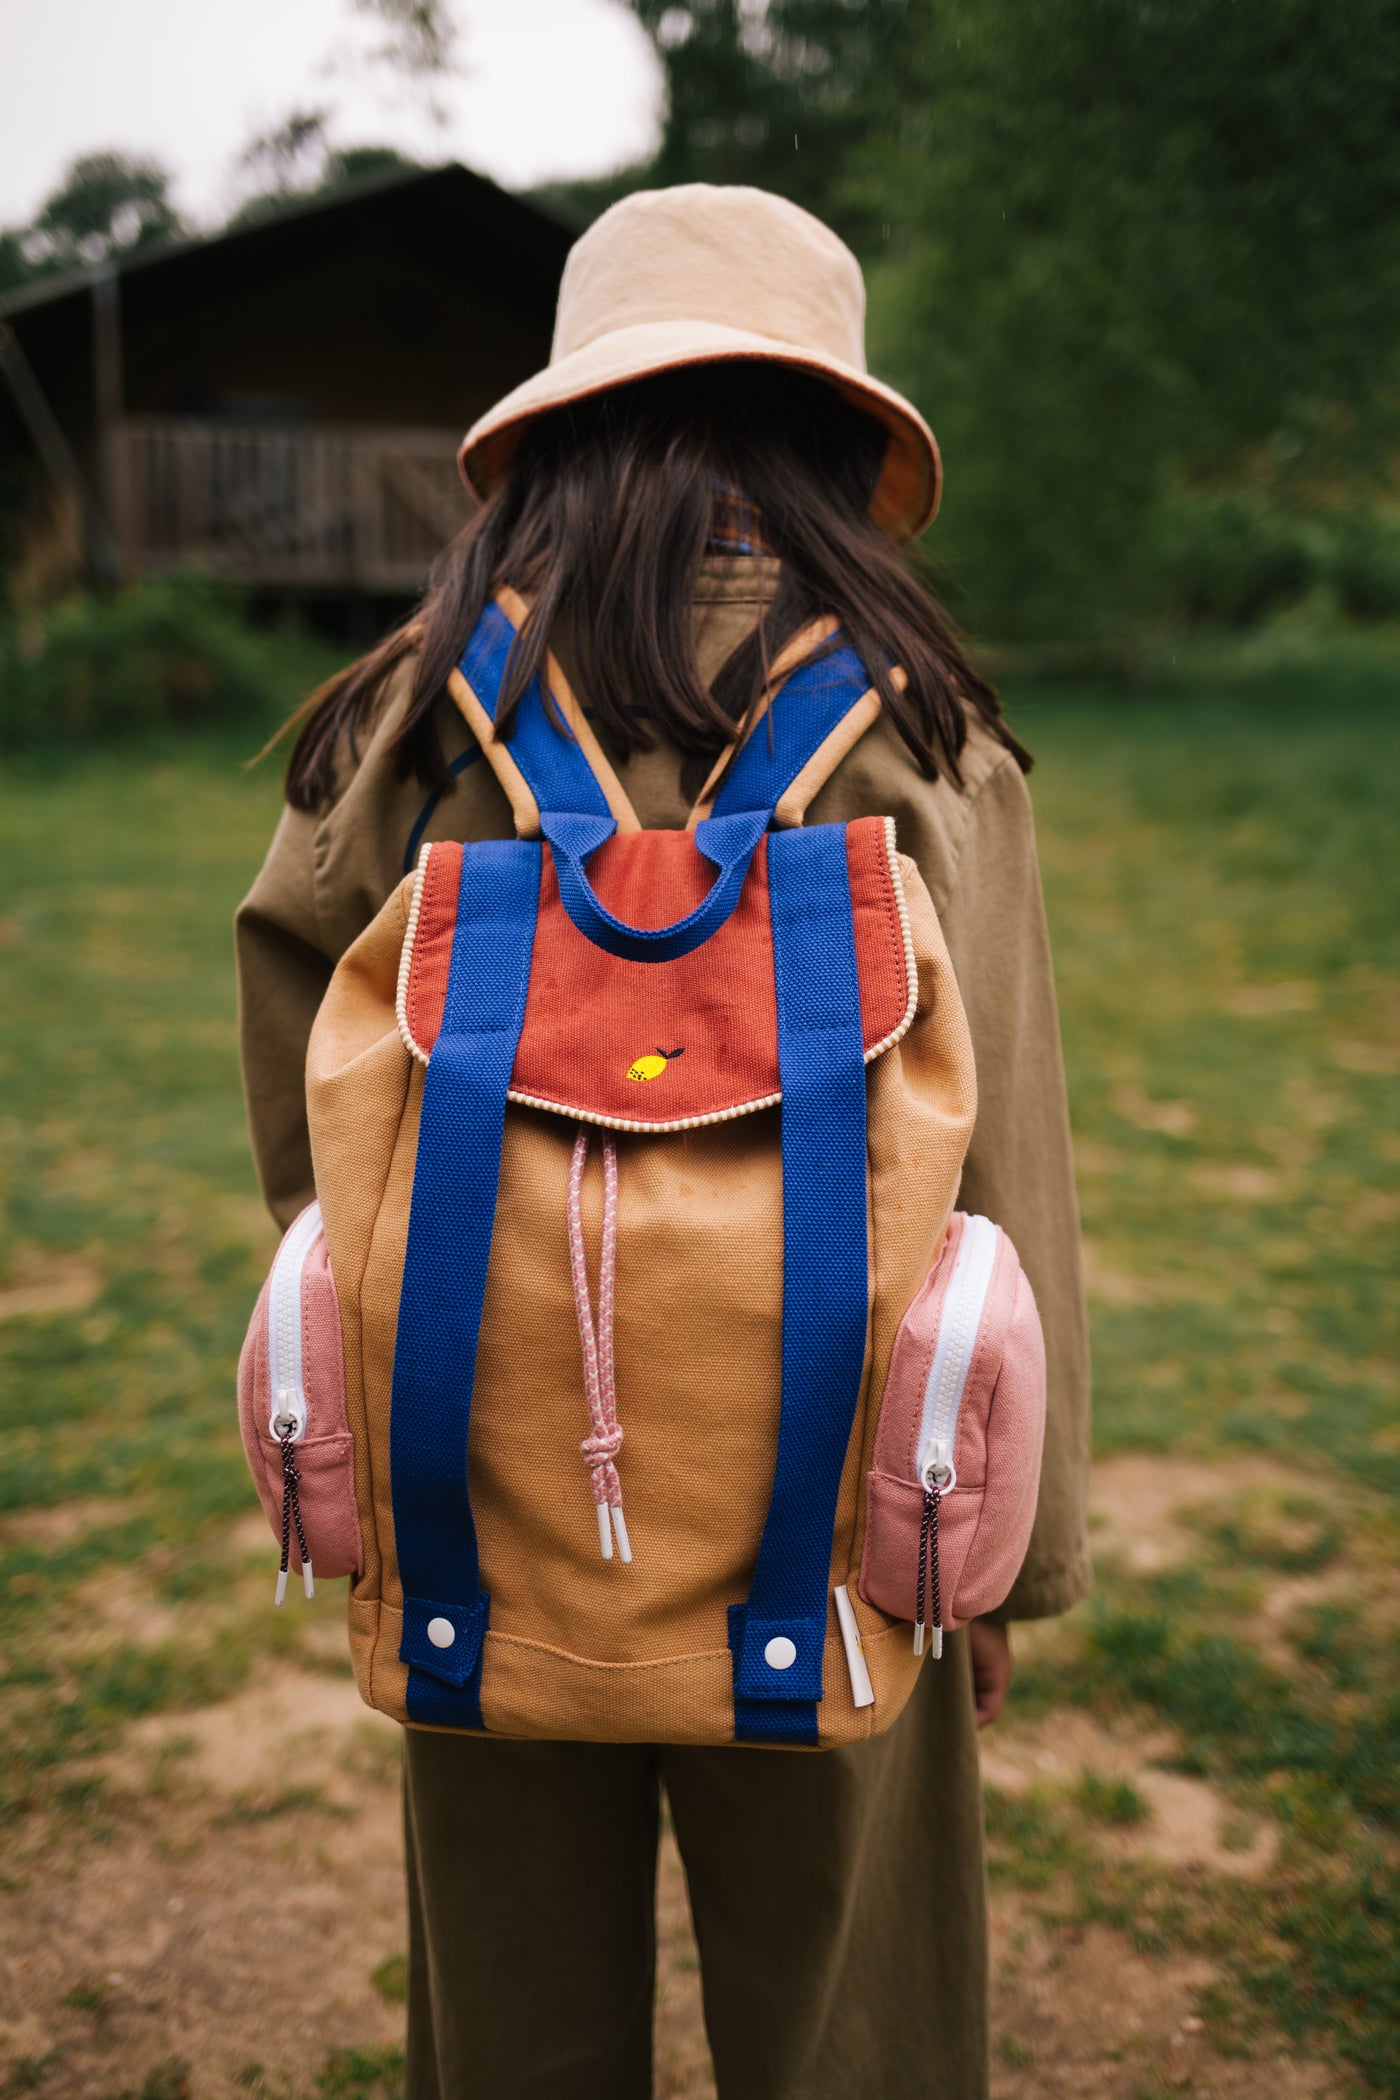 Large Adventure Backpack - Clay